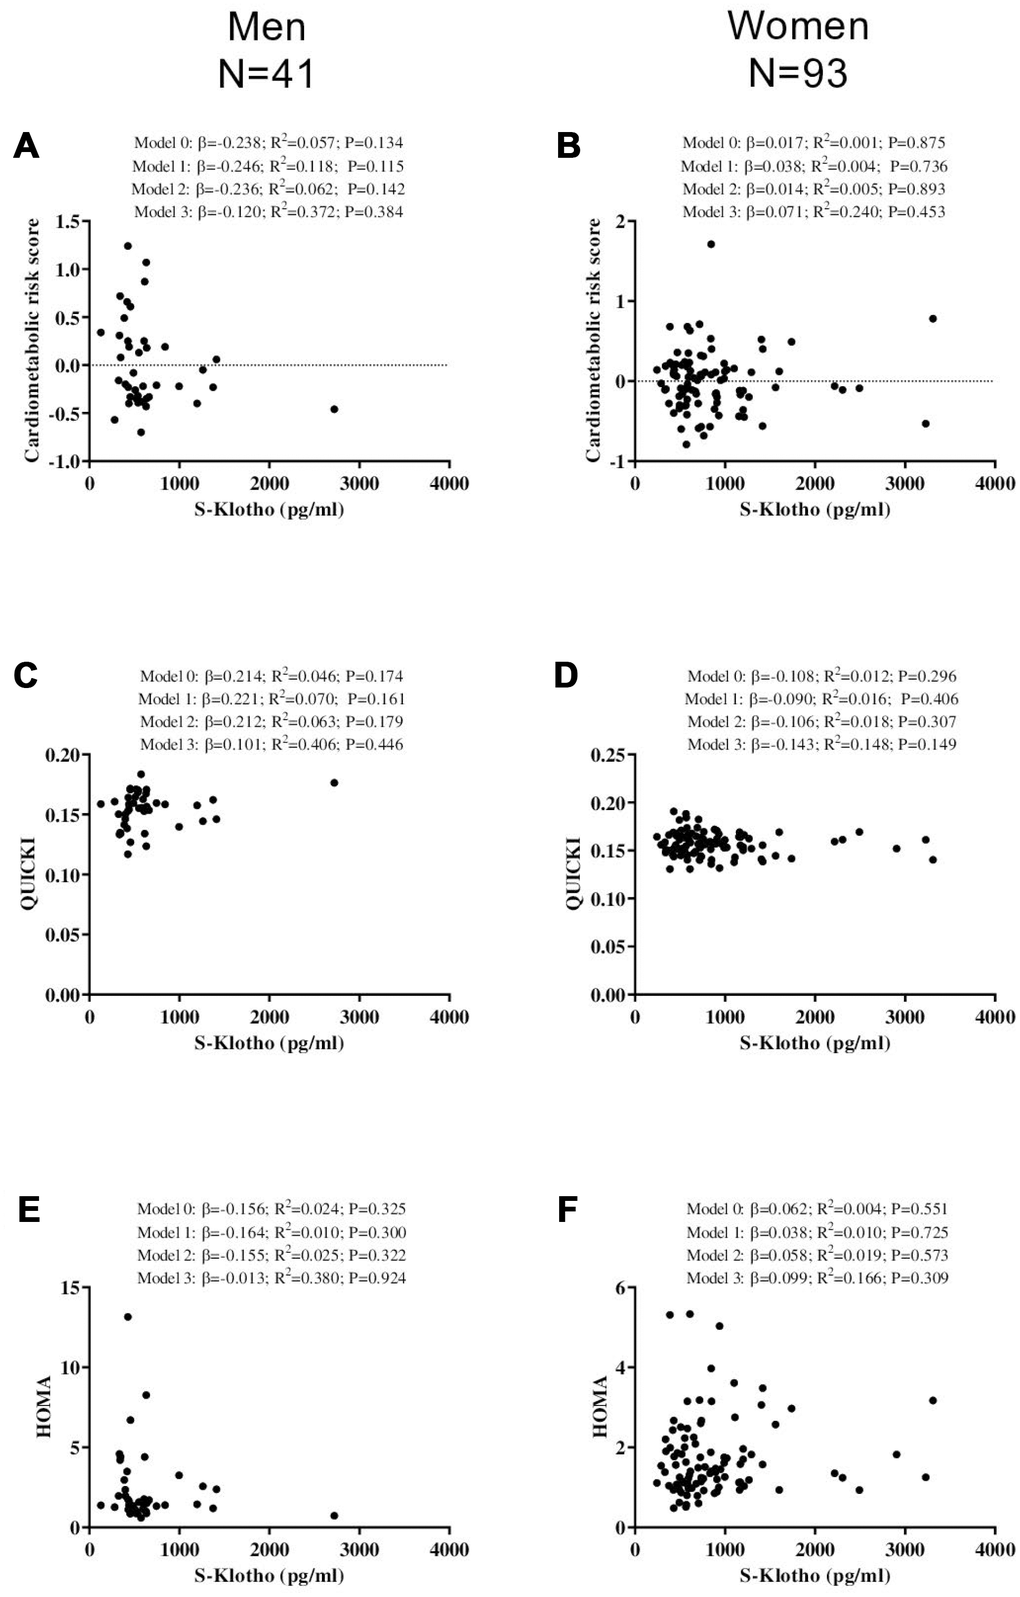 Association between S-Klotho and the cardiometabolic risk index, the quantitative insulin sensitivity check index (QUICKI), and the homeostatic model assessment of insulin resistance index (HOMA) in young, sedentary adults. β standardized regression coefficient; R2 and P are provided for simple and multiple linear regression analyses. Model 0; unadjusted, Model 1; adjusted for age, Model 2; adjusted for energy intake, Model 3; adjusted for cardiorespiratory fitness.